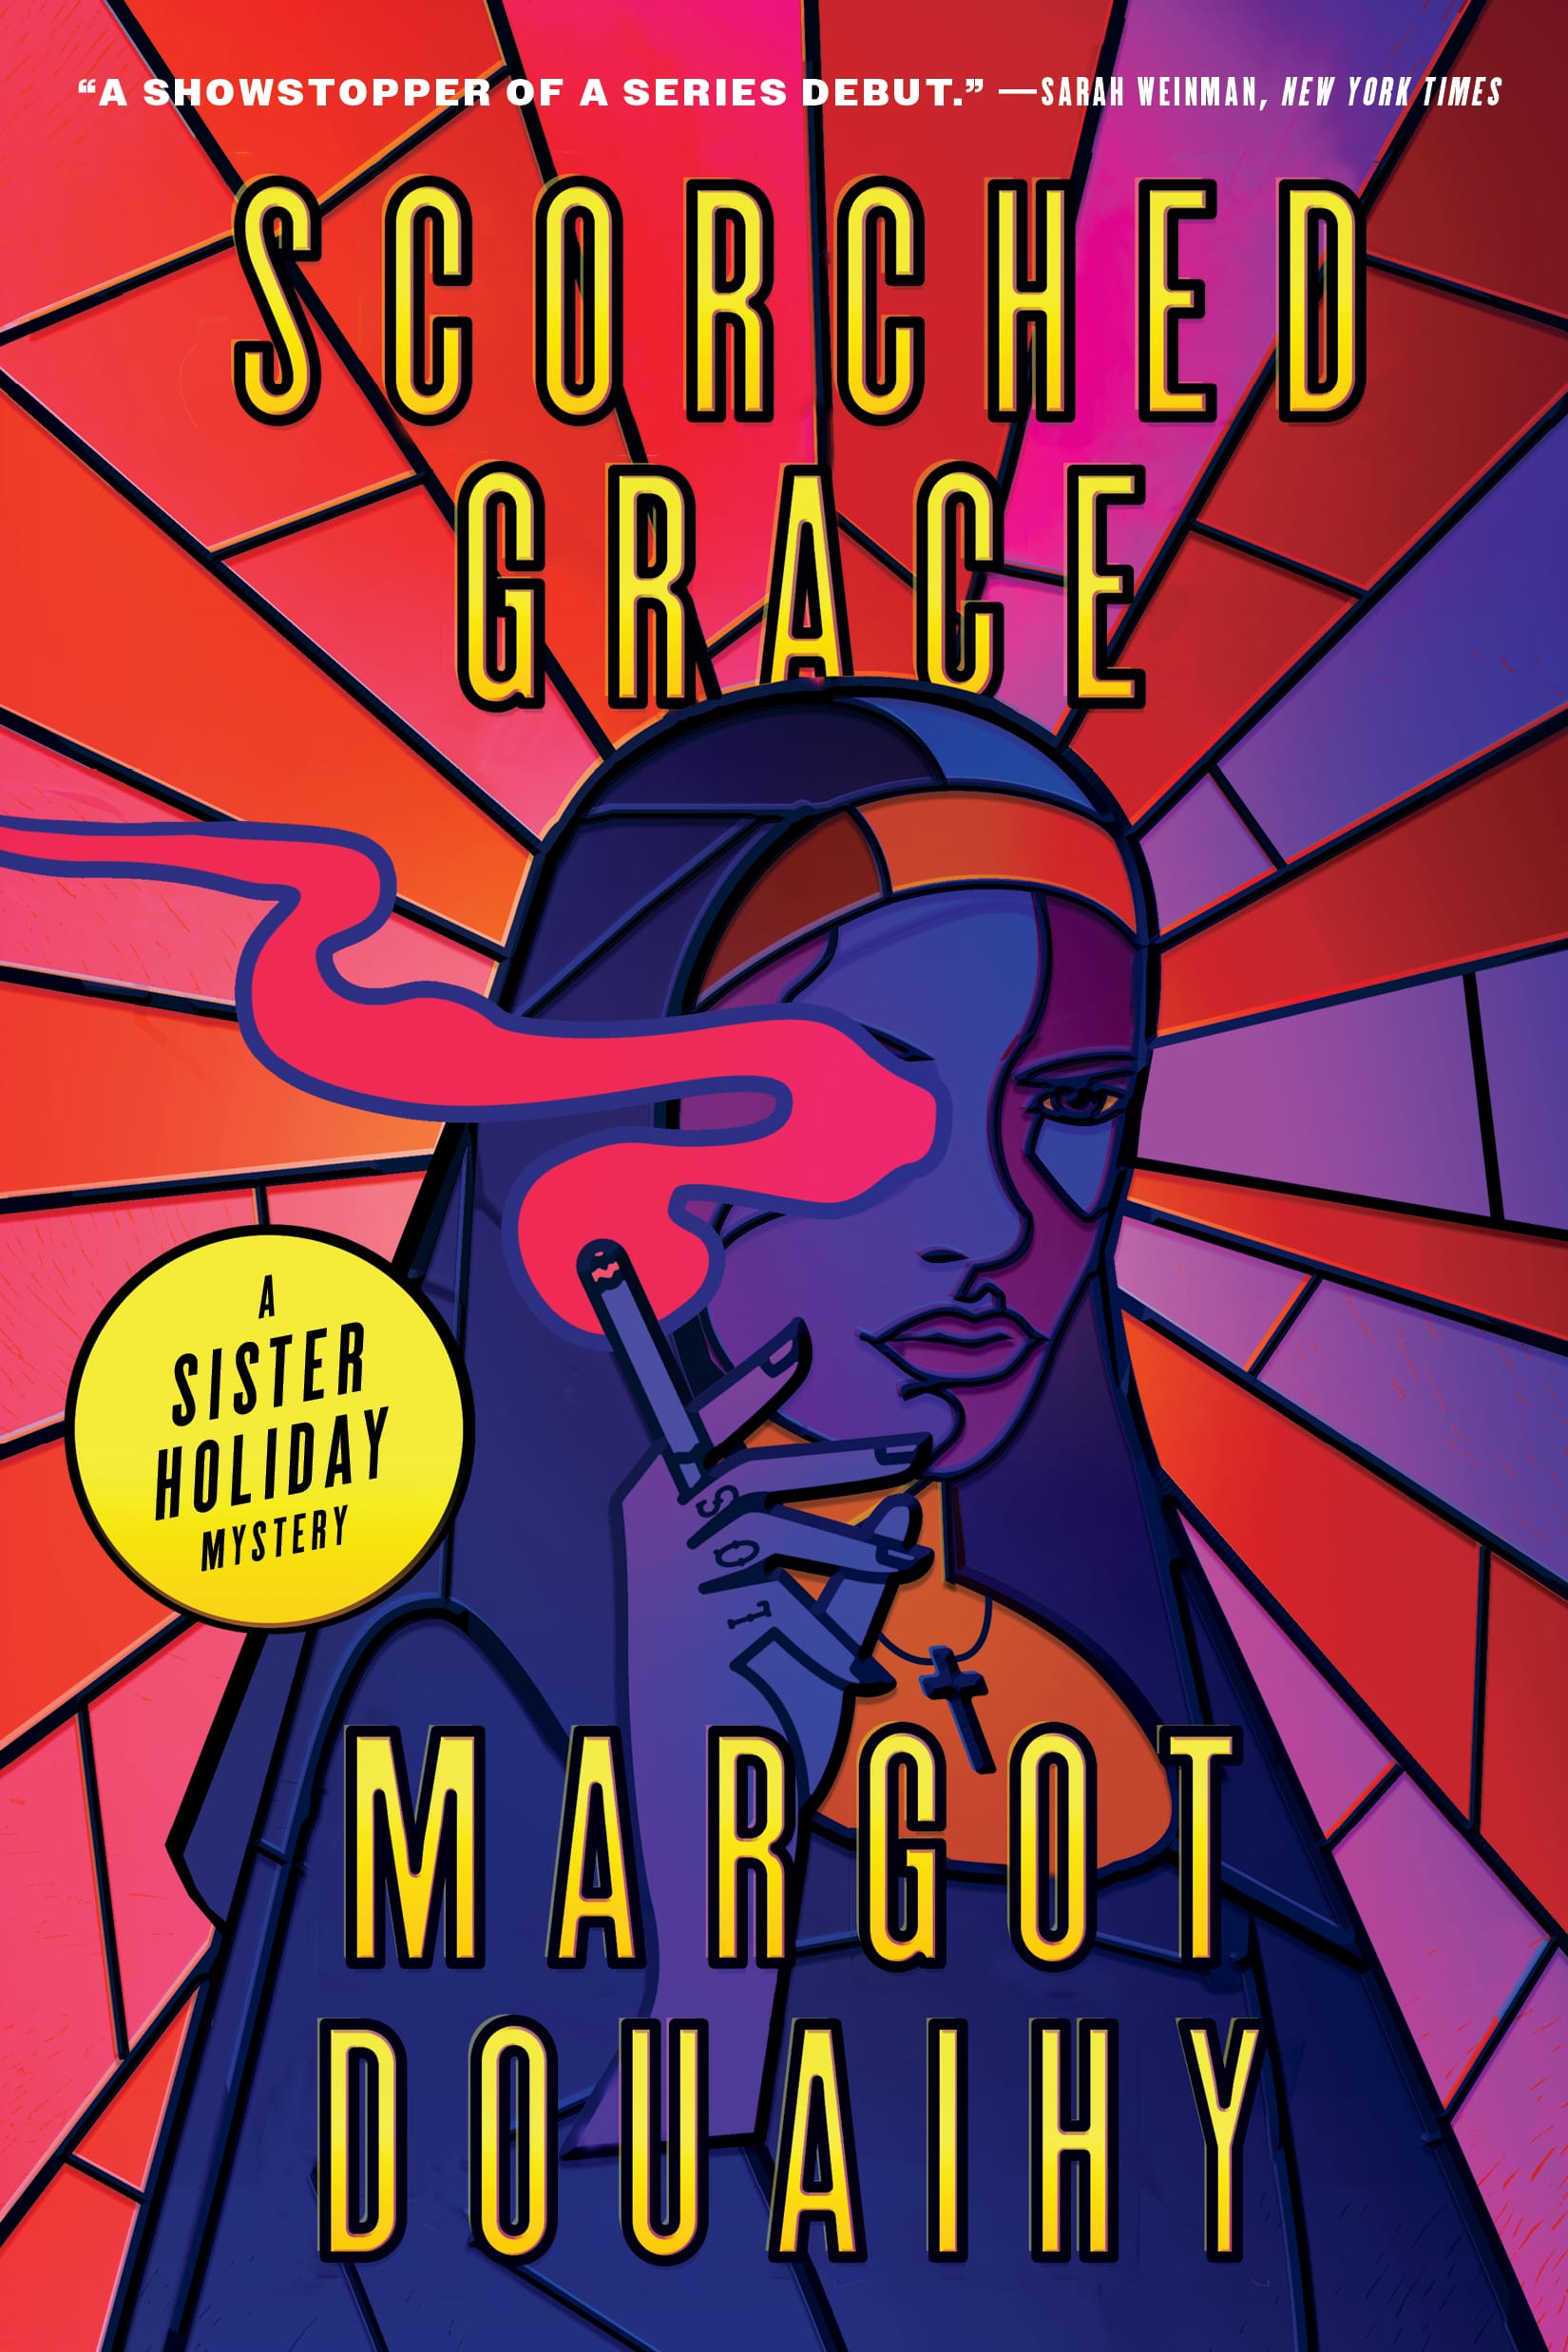 Book cover: "Scorched Grace."